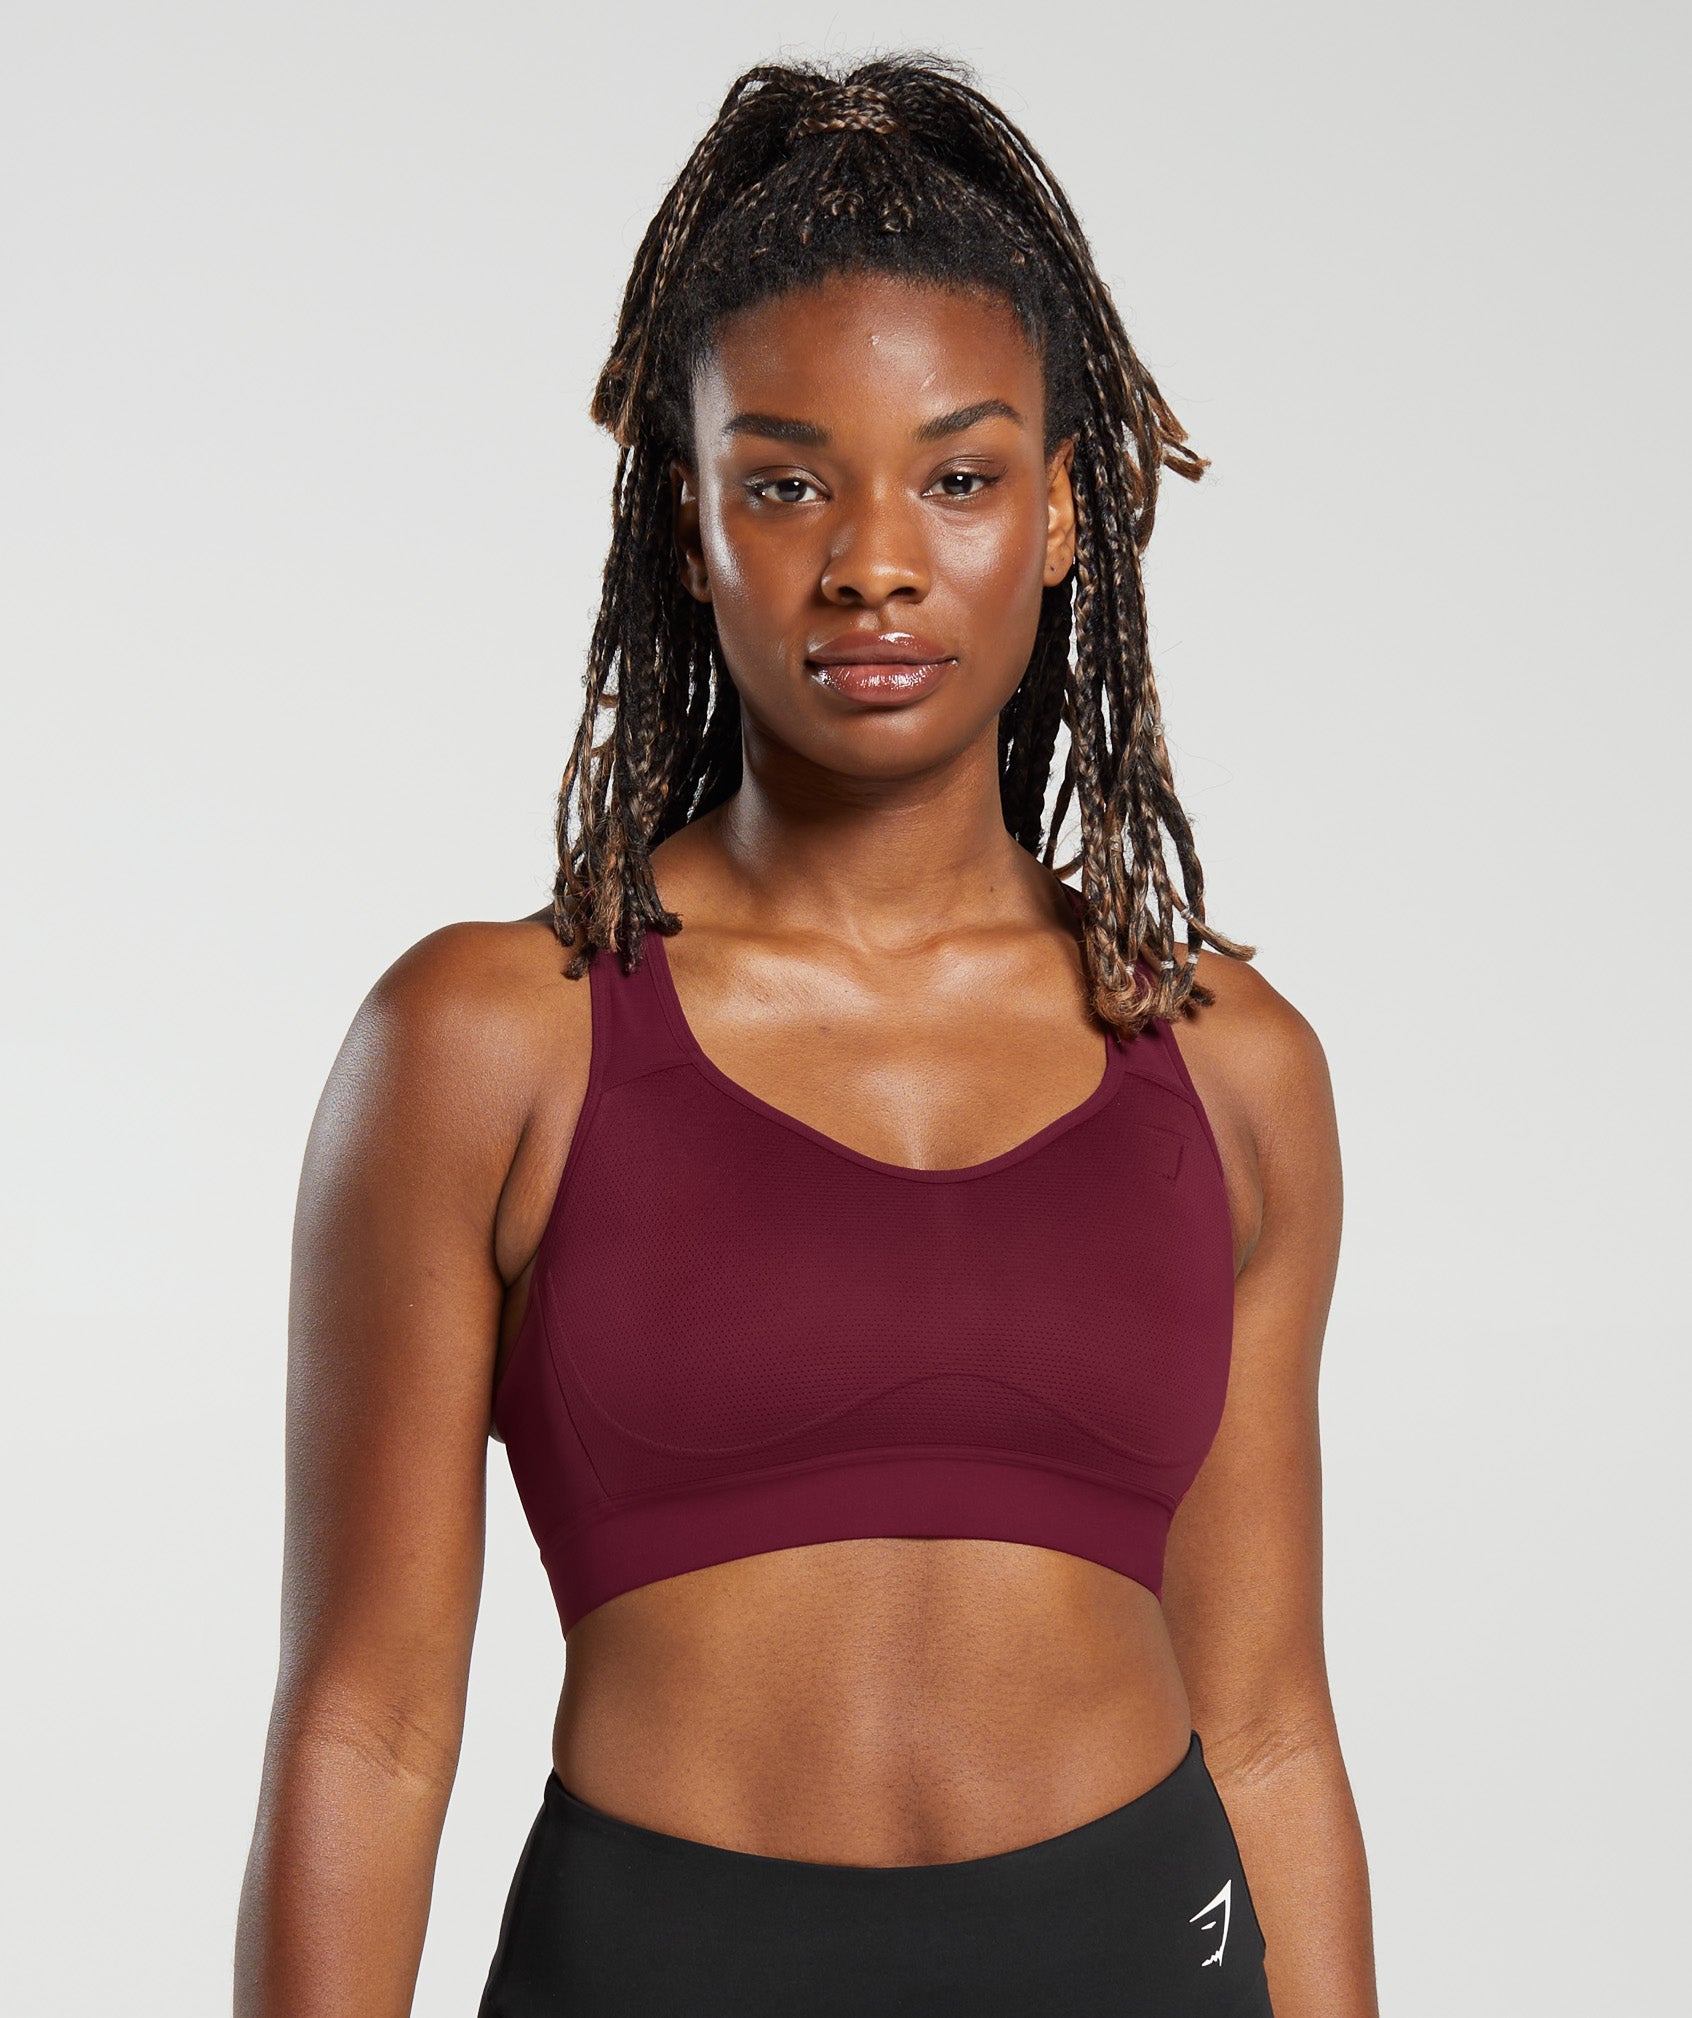 High Impact Sports Bras - For That Extra Bit of Support